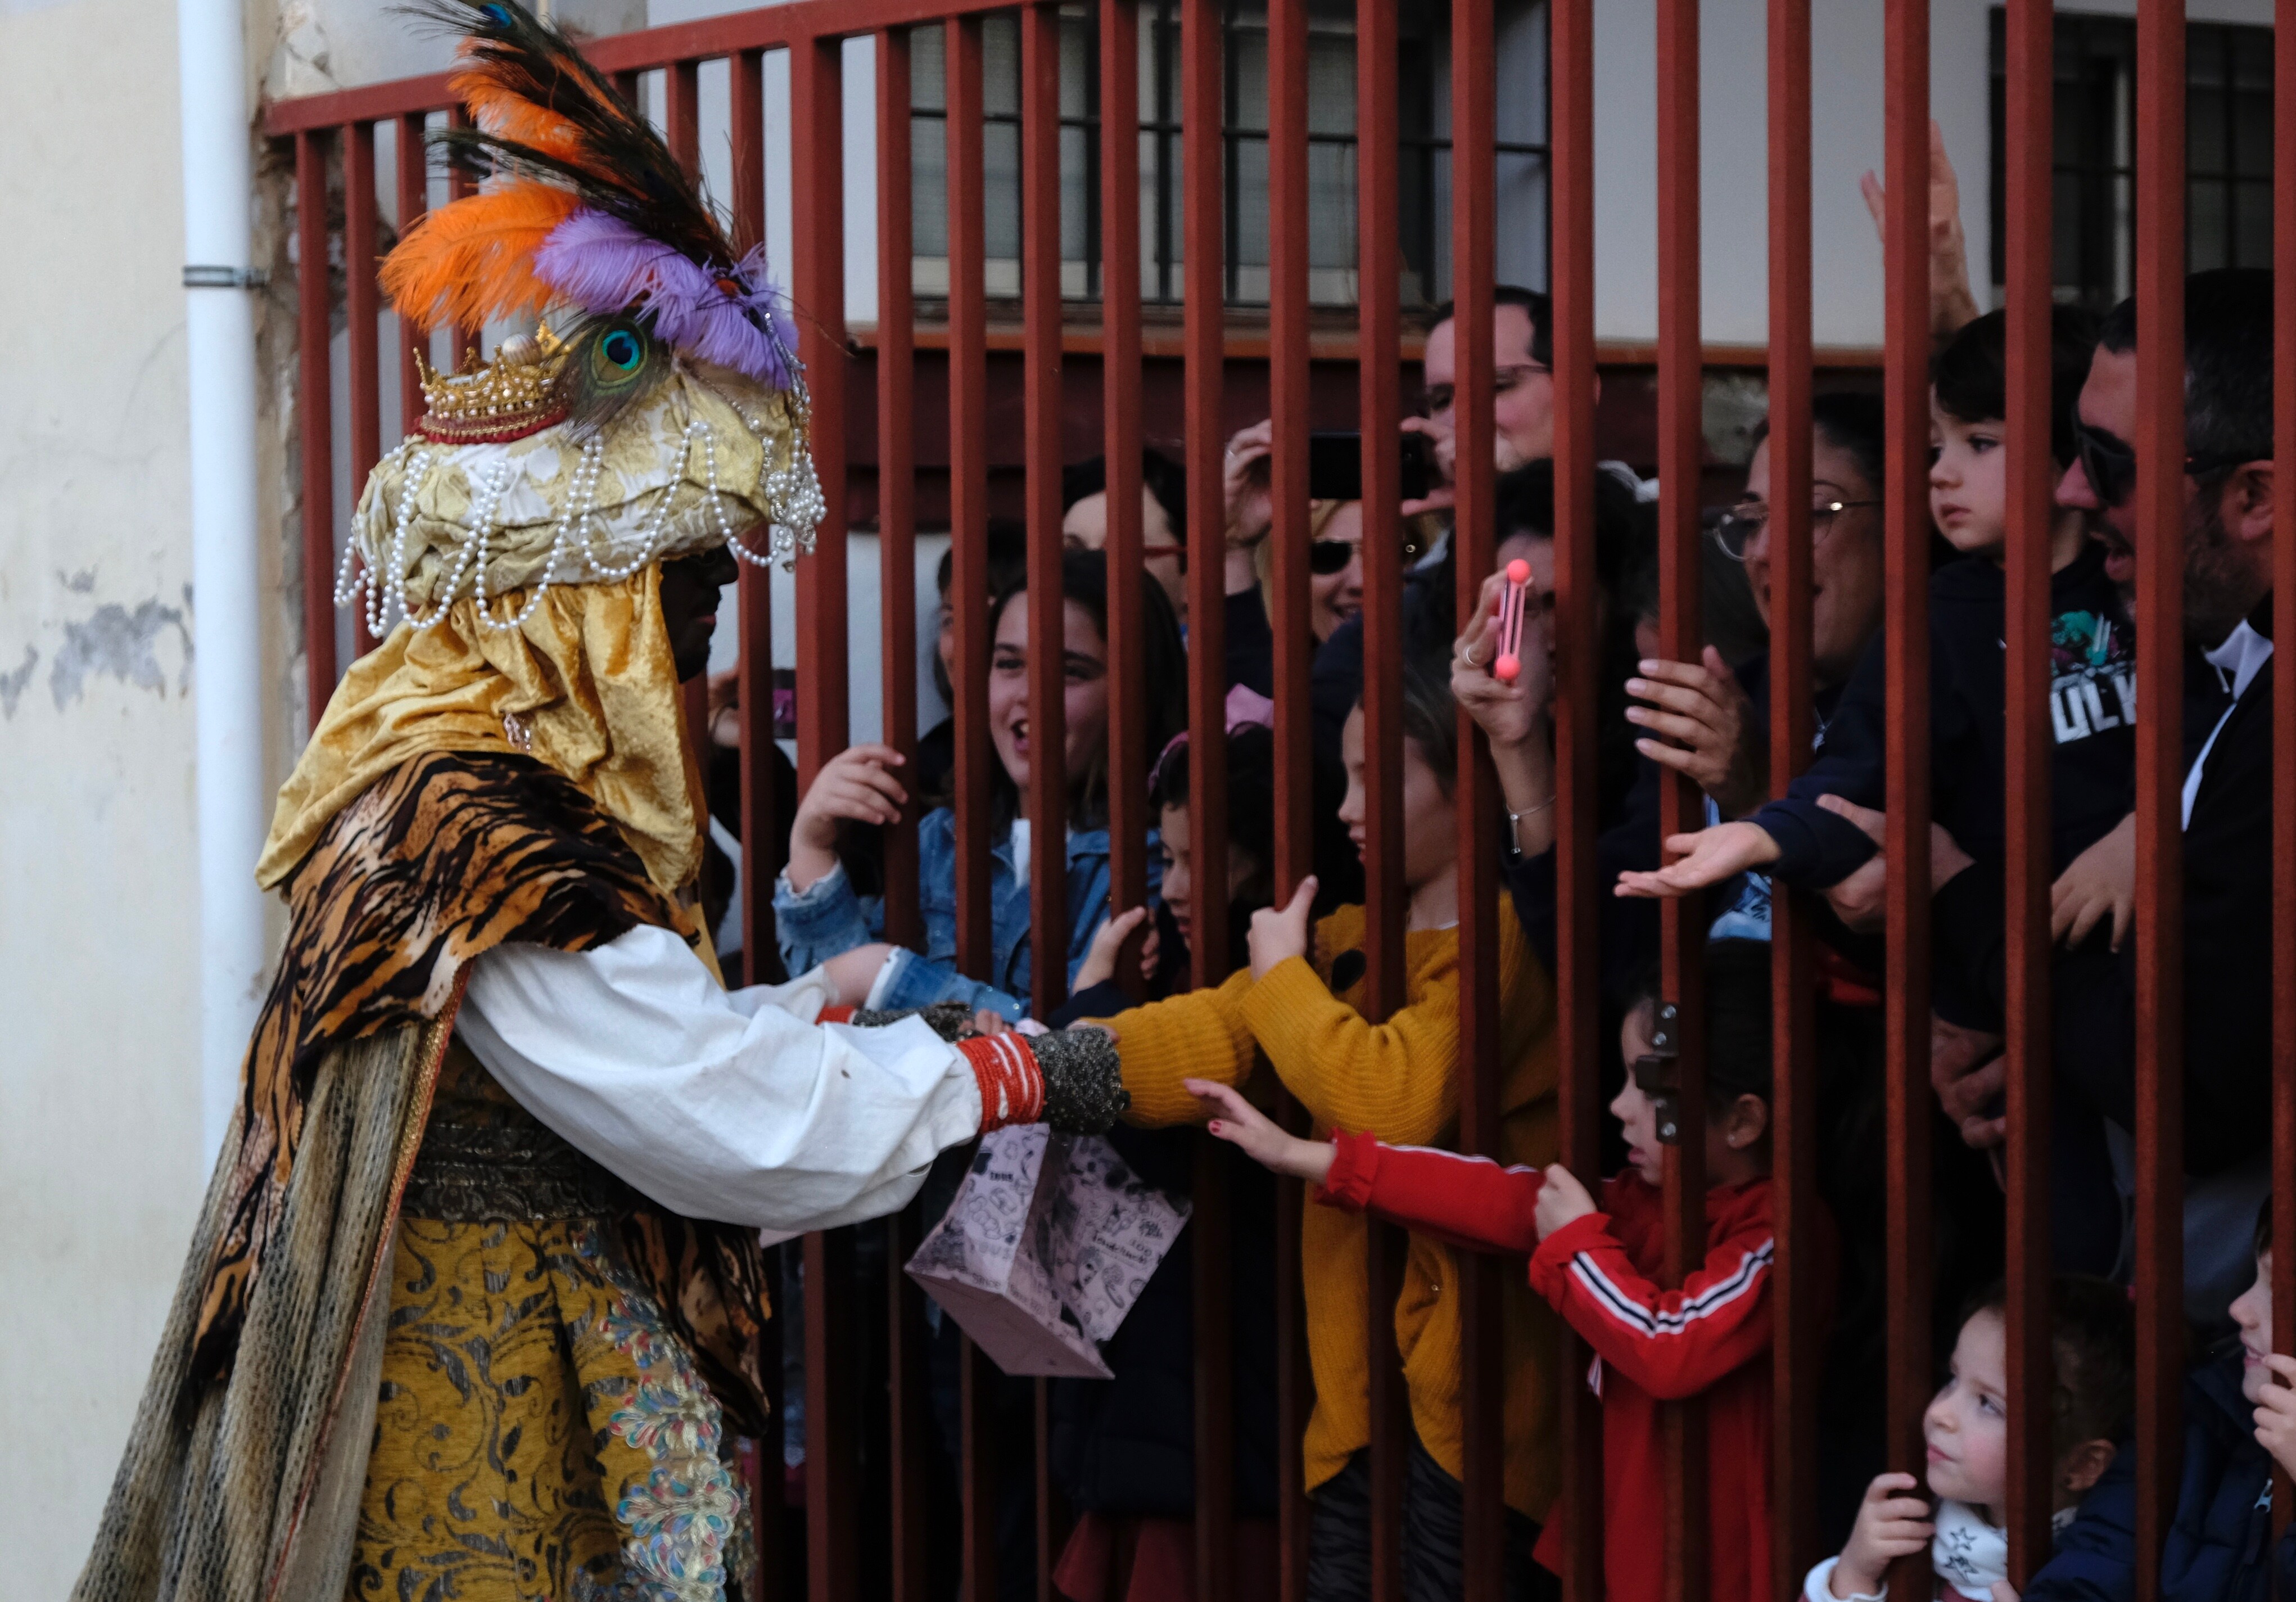 In pictures: Three Kings parade in Malaga's Cruz del Humilladero district